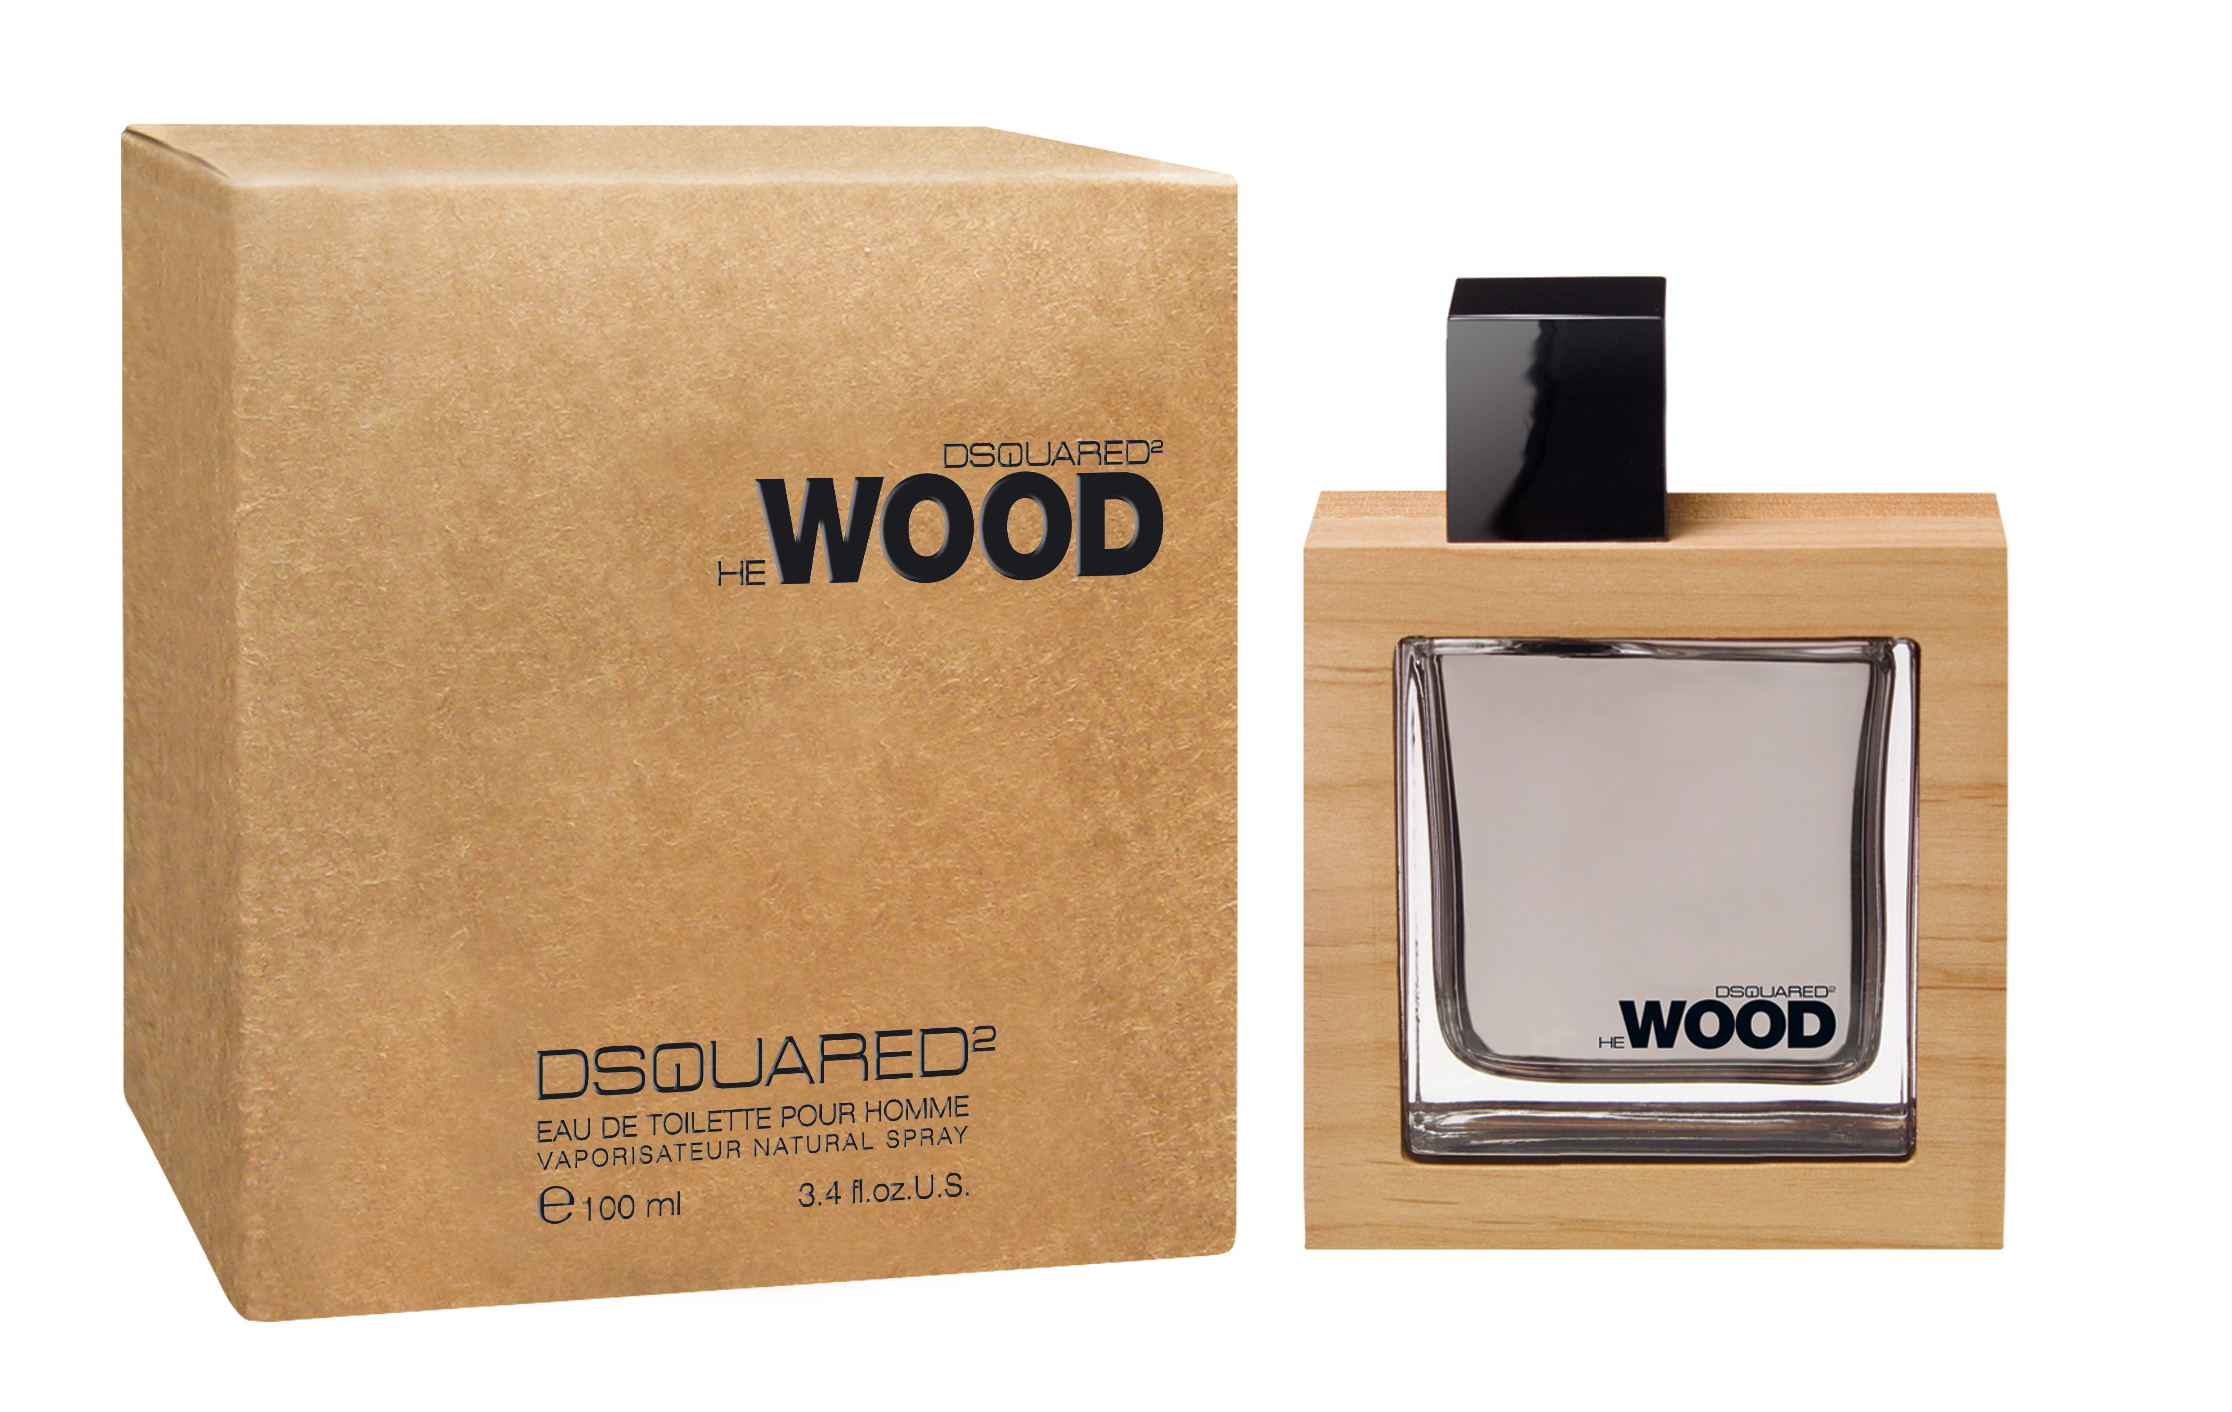 he-wood-dsquared-cologne-for-him.jpg